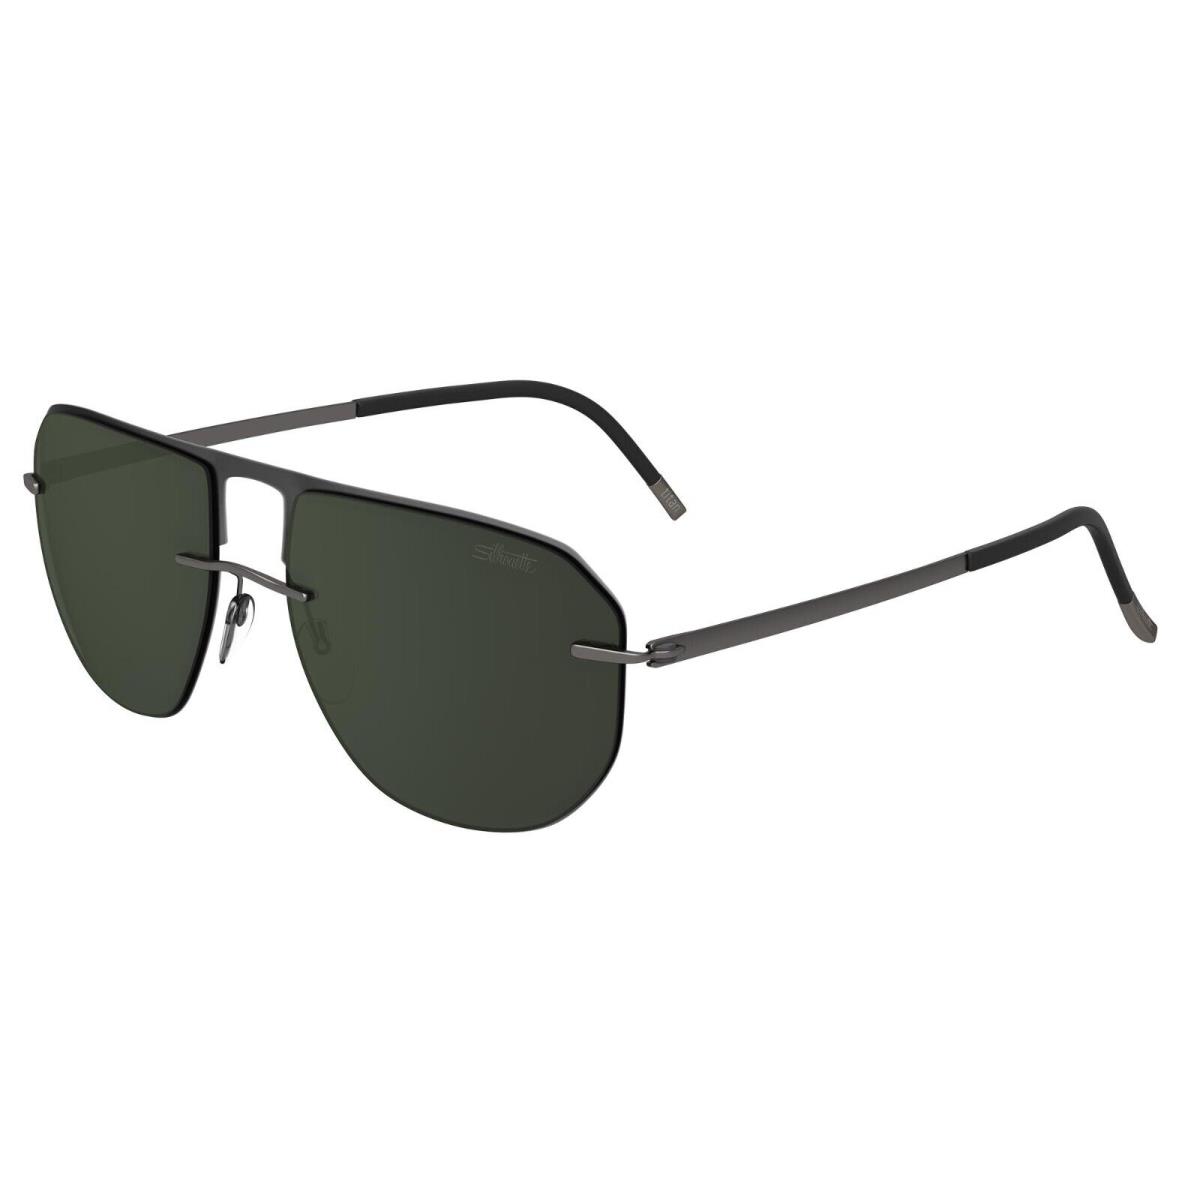 Silhouette Accent Shades 8704 Anthracite/green 6560 Sunglasses